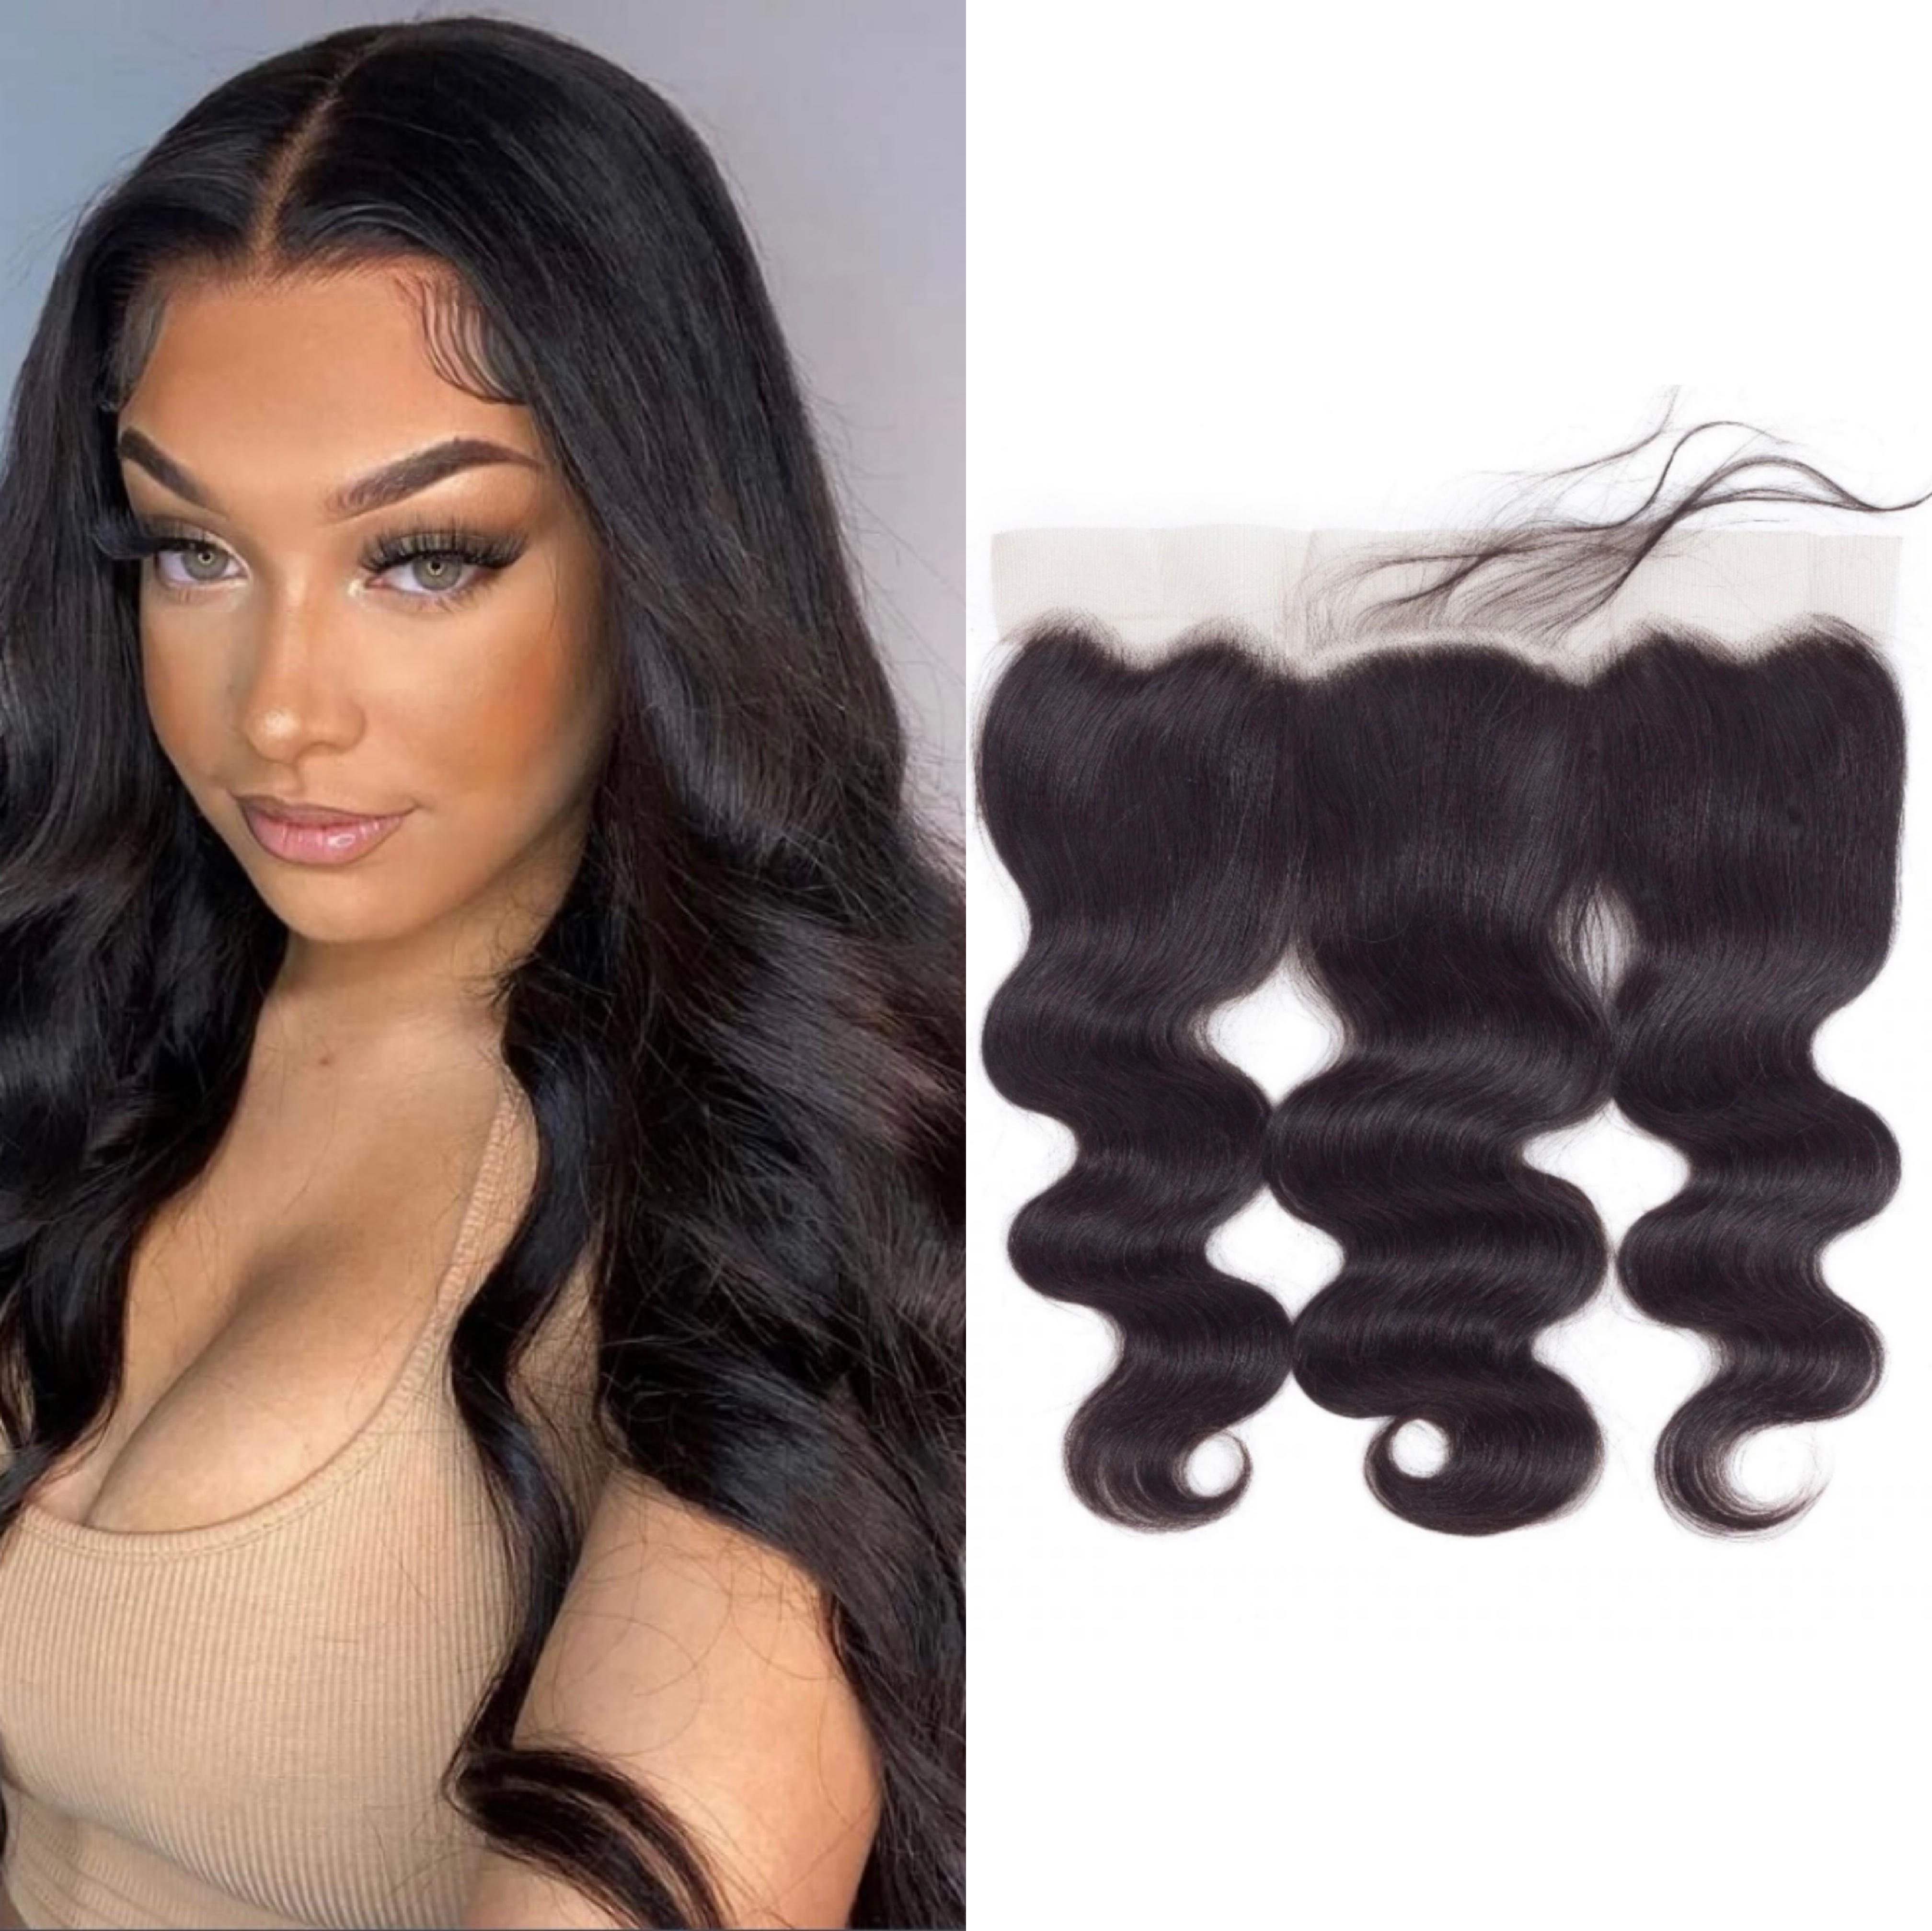 Body Wave 13X6 Ear To Ear Lace Frontals Close with Natural Hairline Featured Image